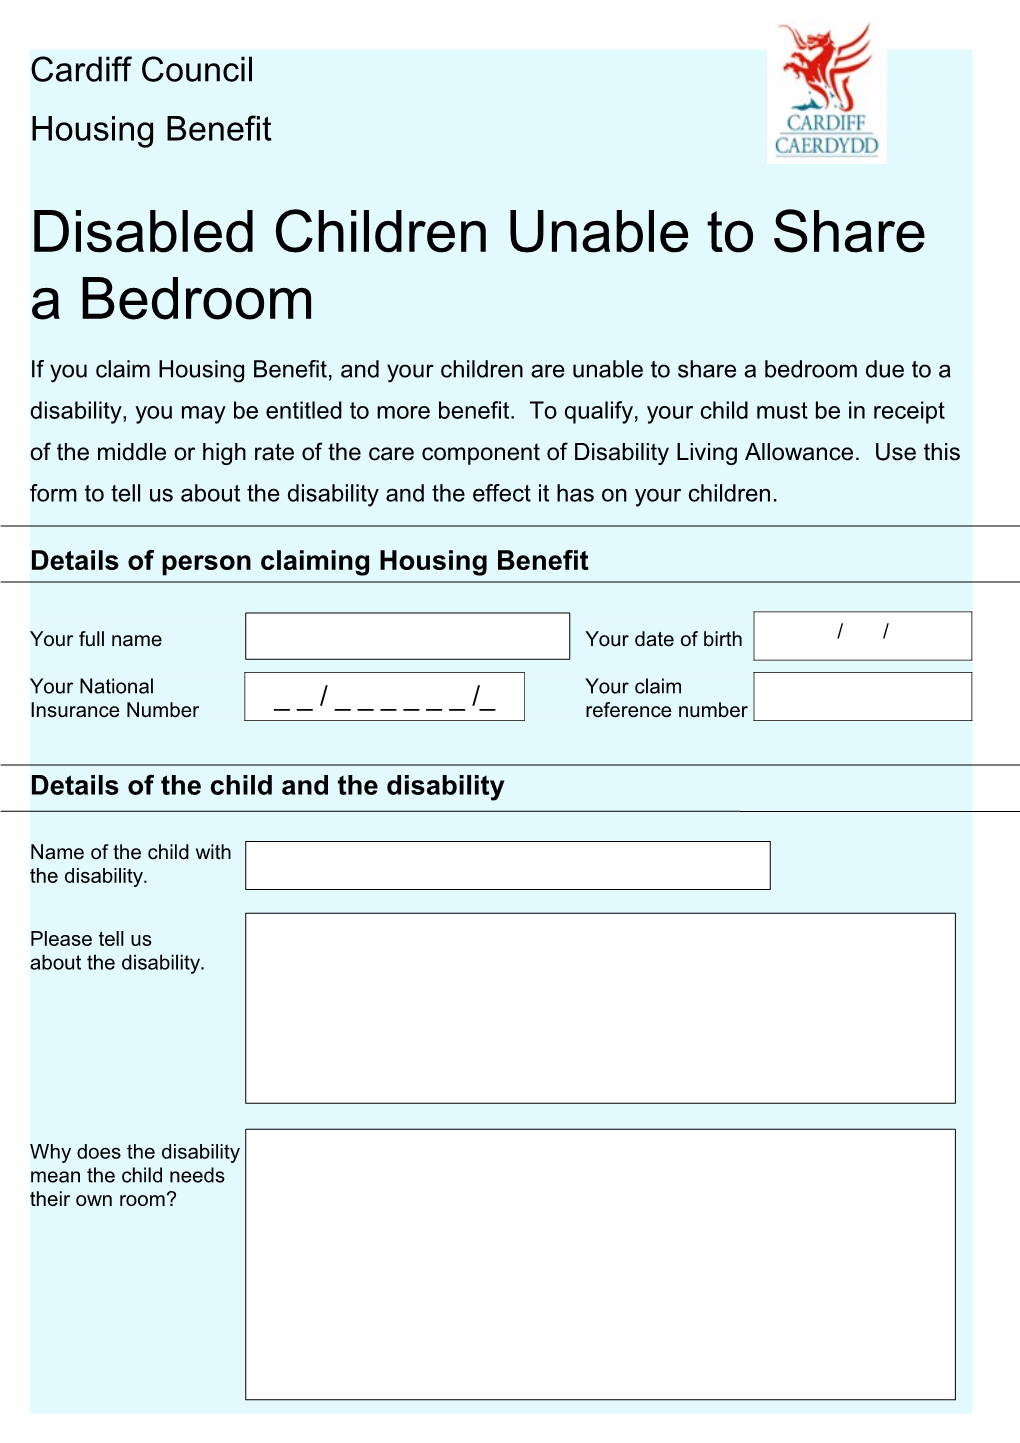 Disabled Children Unable to Share Form